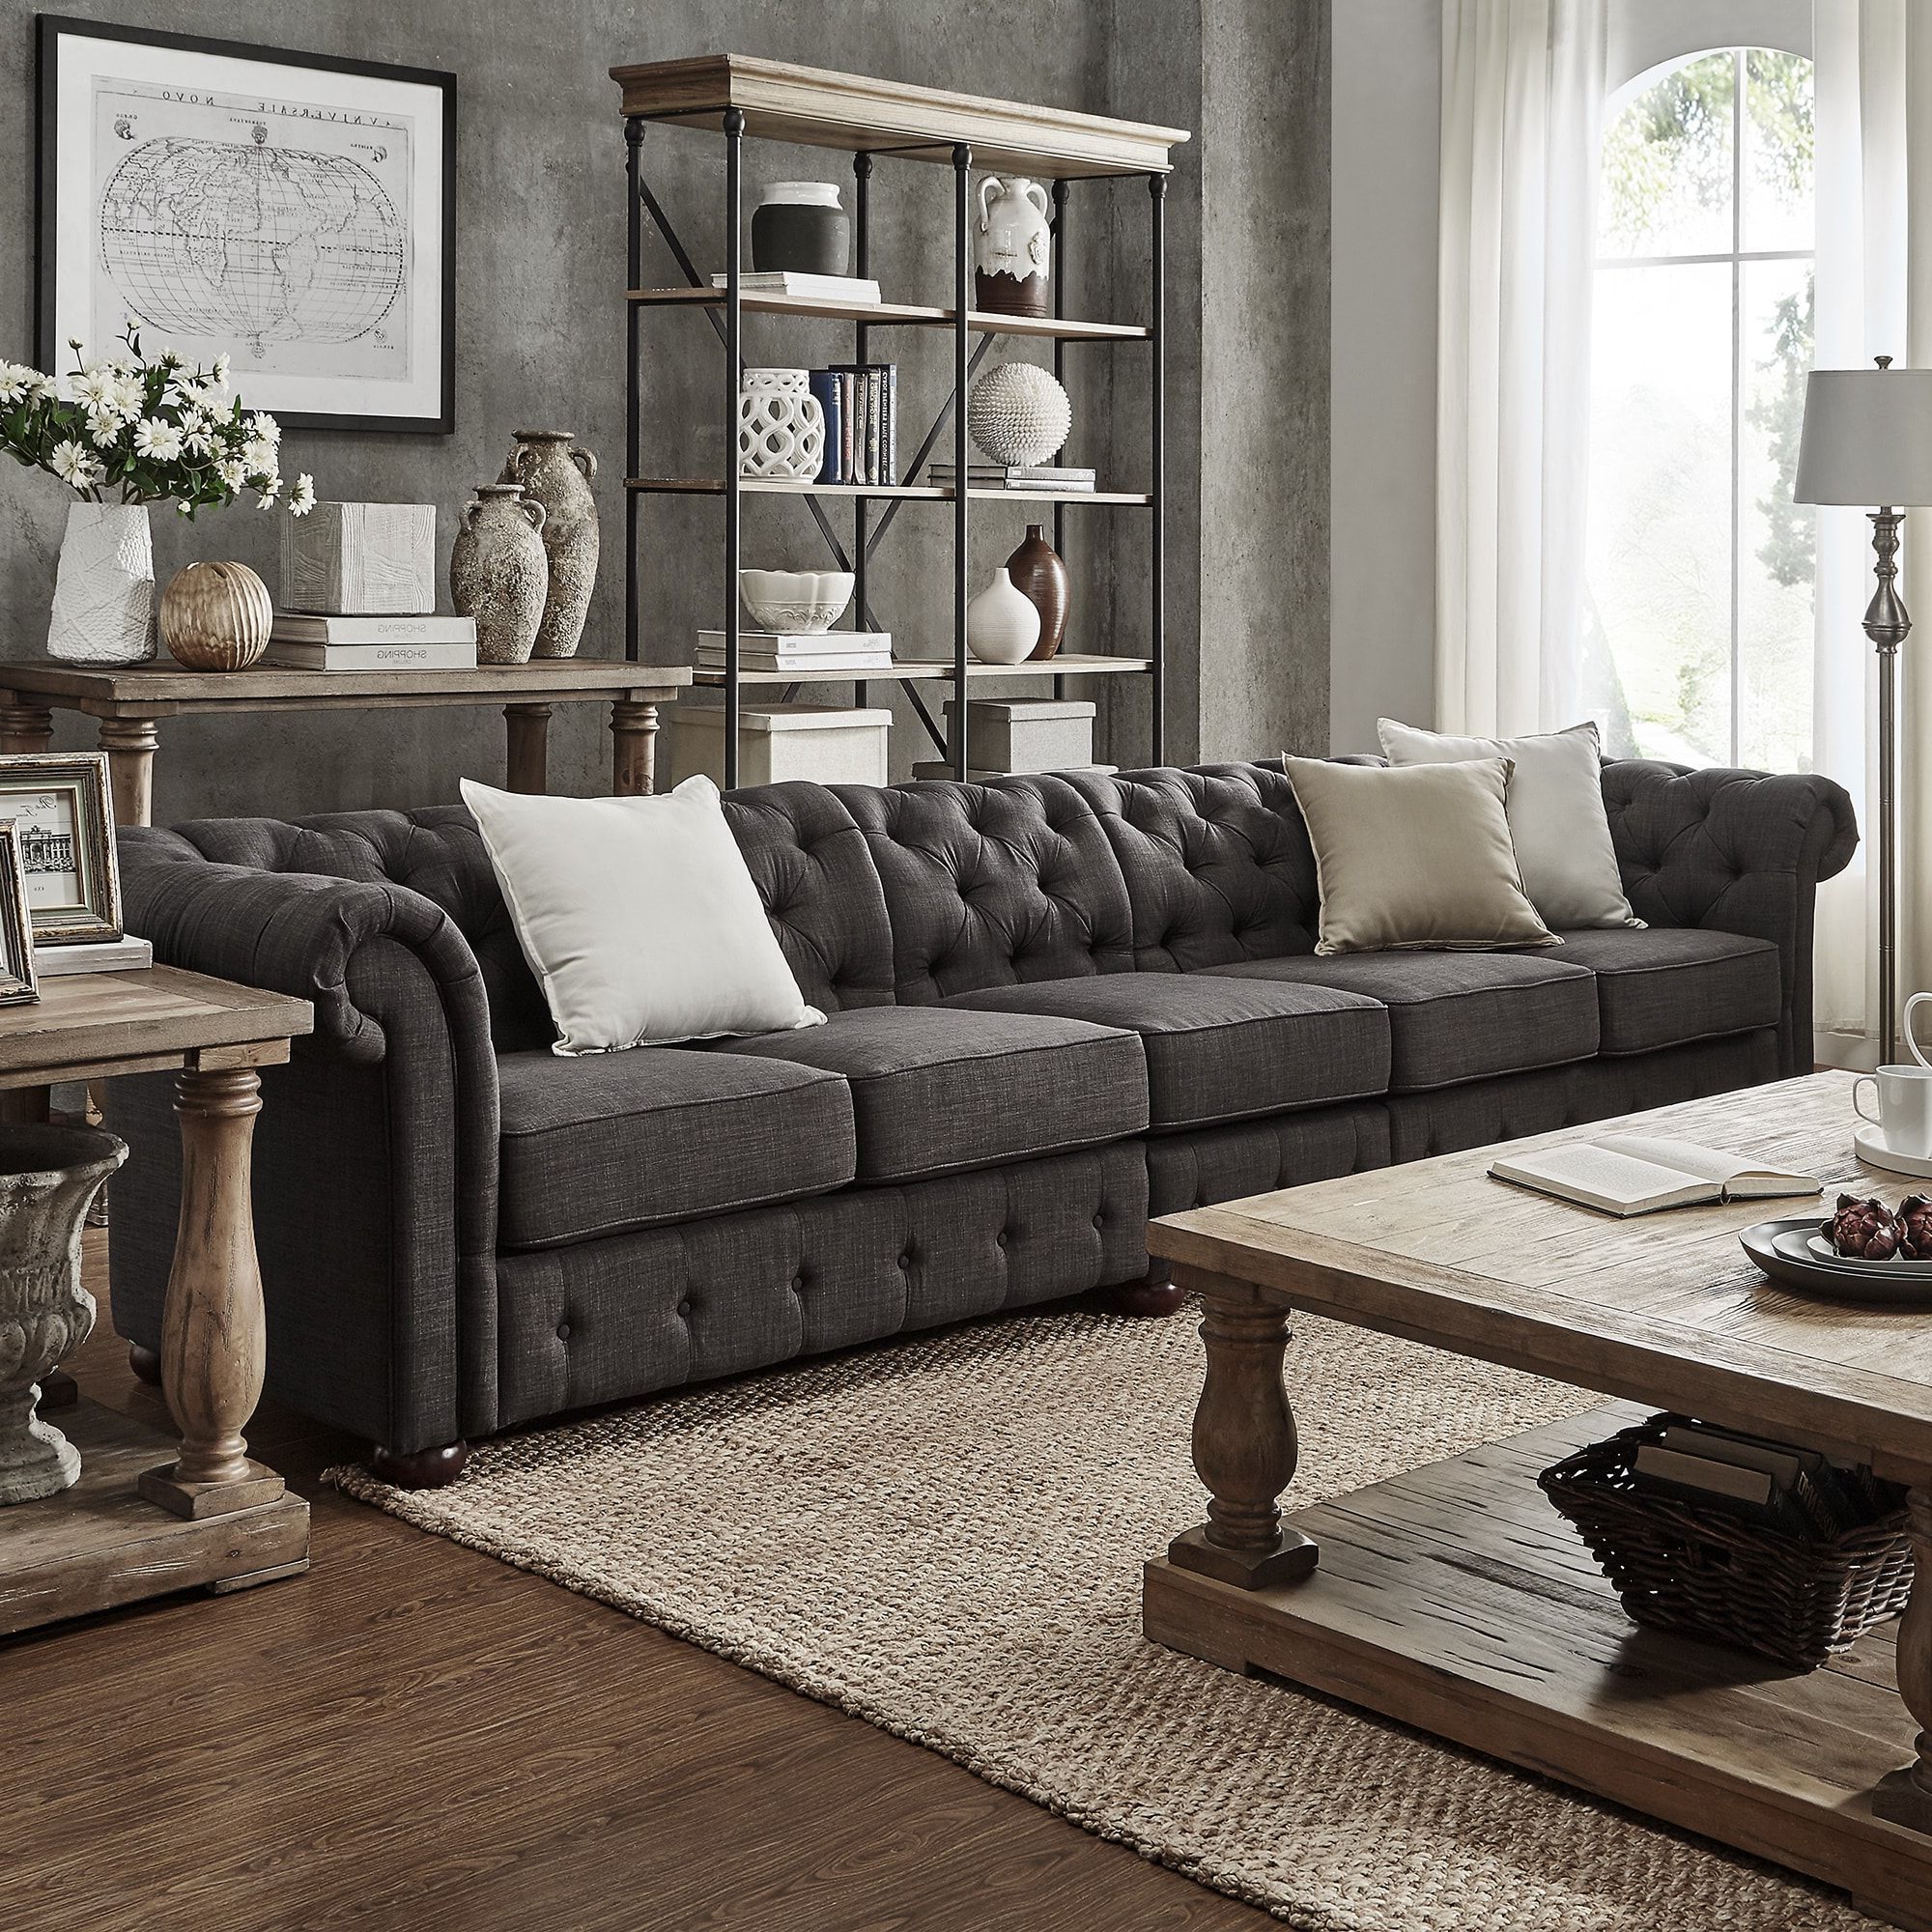 Newest Sofas In Dark Grey Pertaining To Knightsbridge Dark Grey Extra Long Tufted Chesterfield Sofainspire (View 7 of 15)